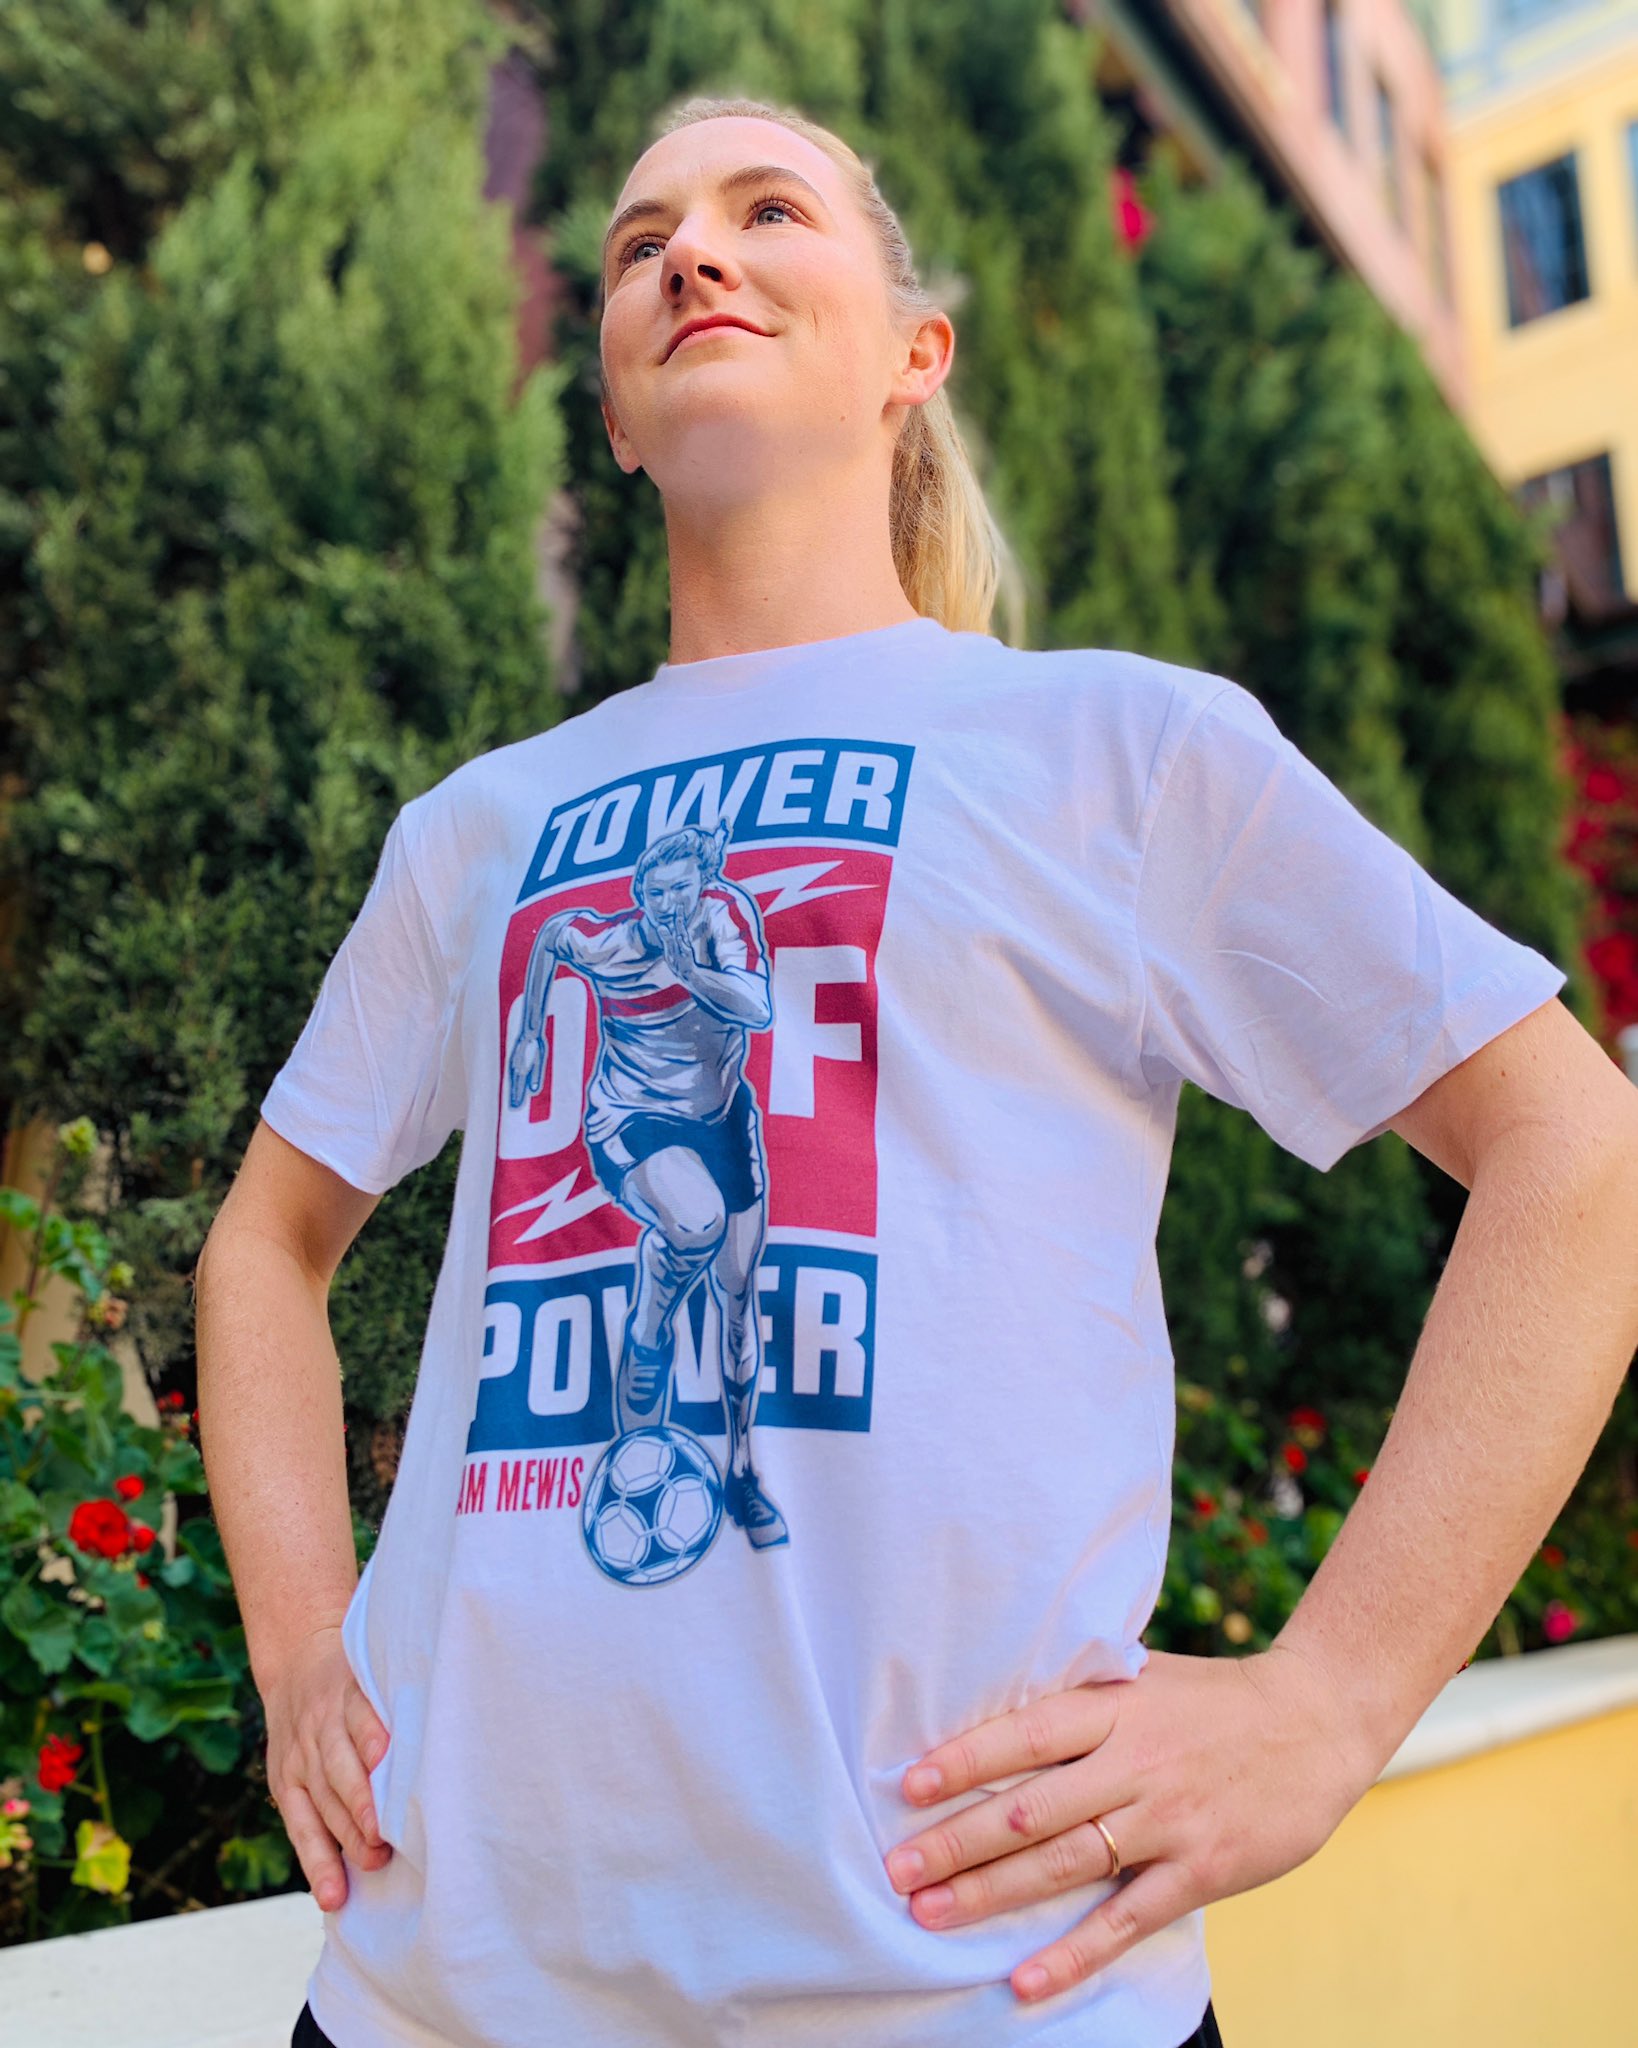 direkte pludselig session Samantha Mewis on Twitter: "Tower of Power shirts on sale now! $1 from  every shirt sold goes to @hiddengemsoccer @Represent @USWNTPlayers https://t.co/uw0rFcnrXL  https://t.co/QNQOsmsdHt" / Twitter